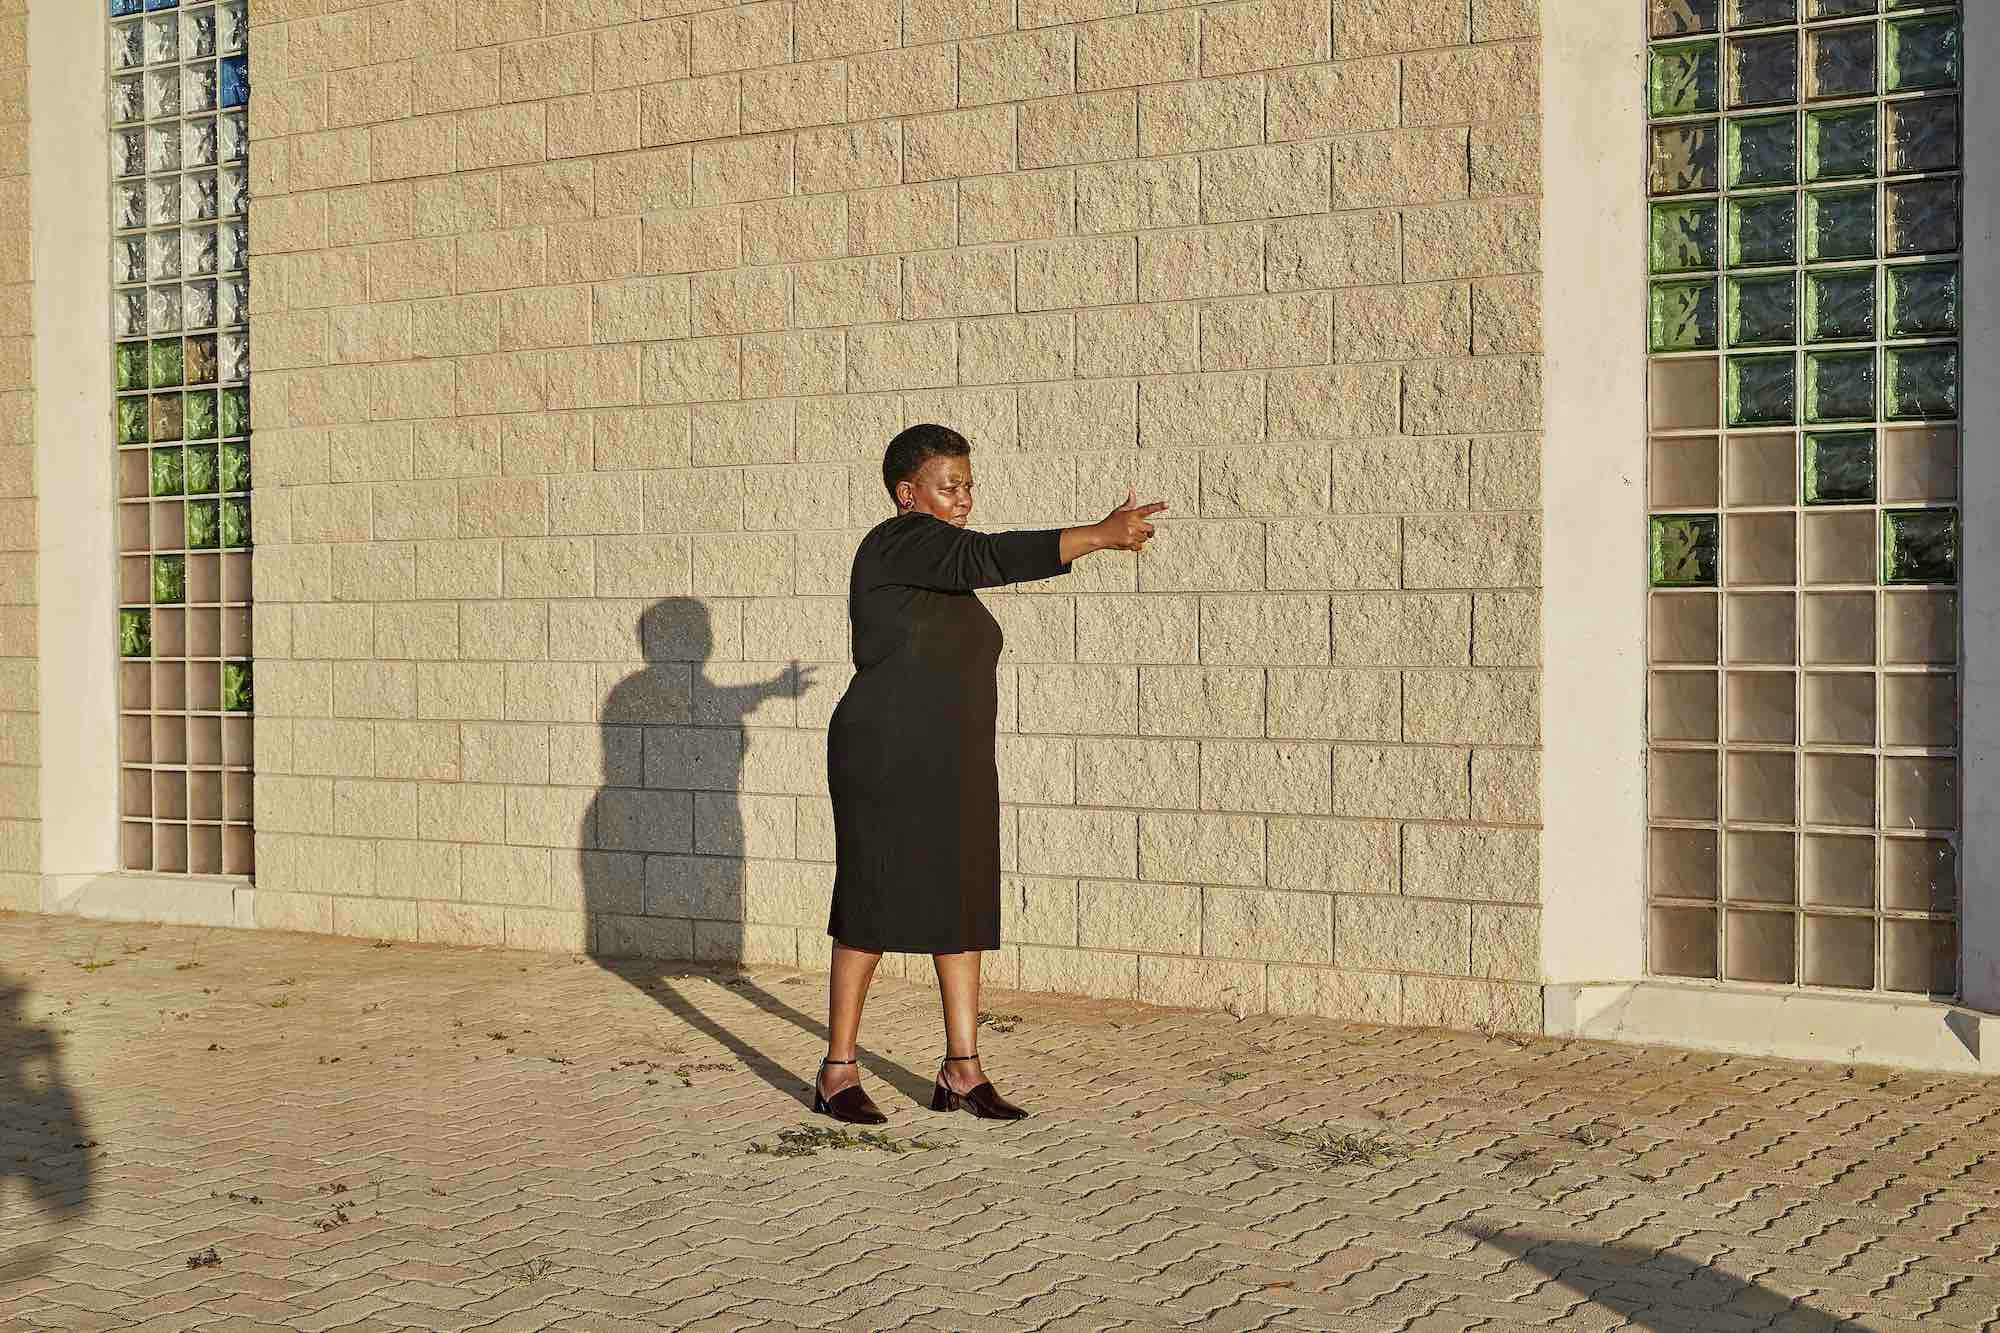 Photograph of a Black woman in front of a stone wall, pointing her finger as if it were a gun © Thero Makepe